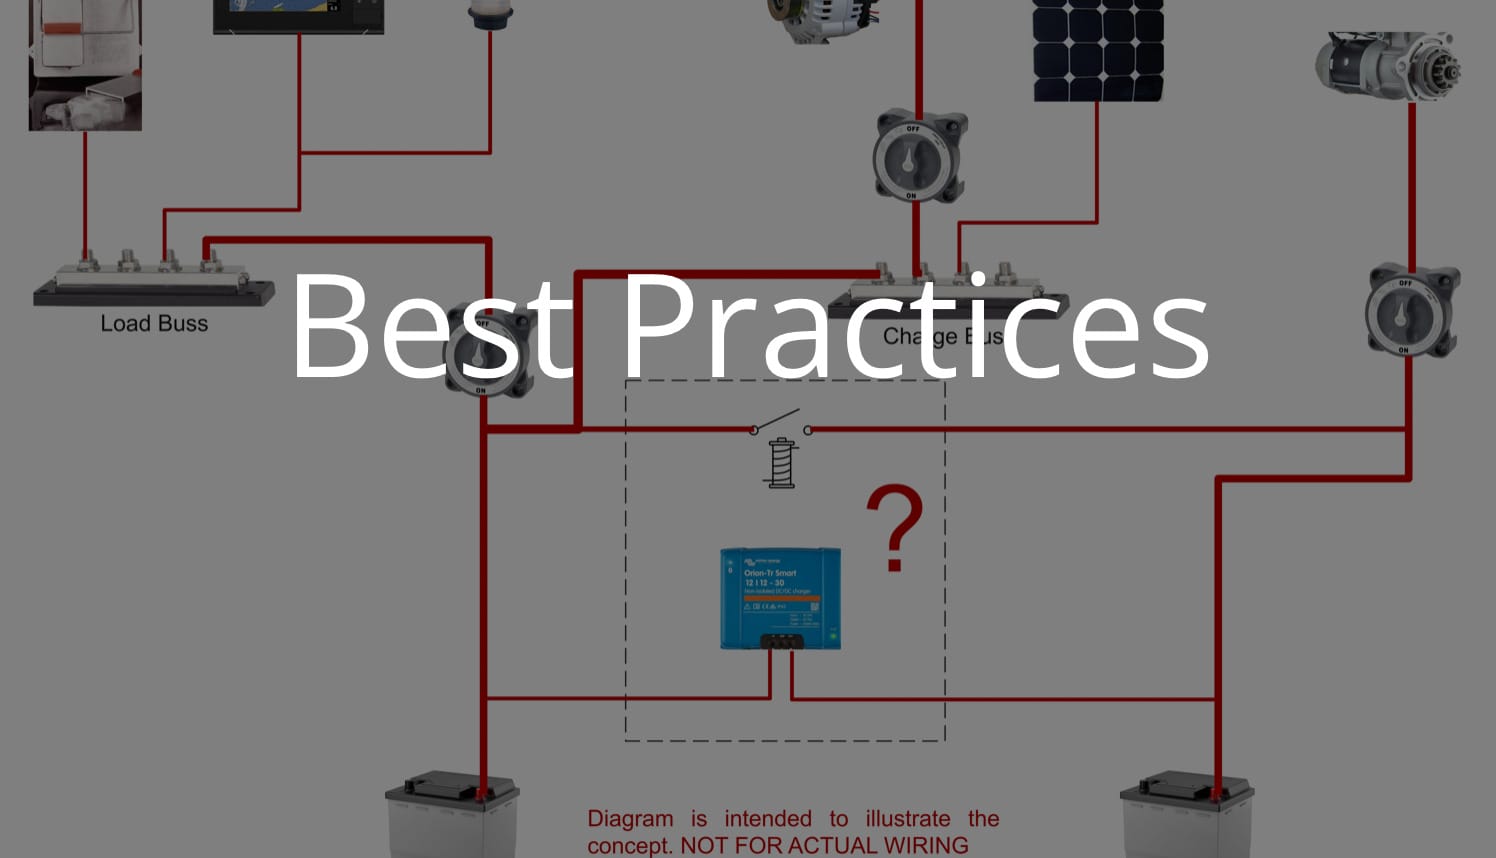 Battery Bank Separation and Cross-Charging Best Practices